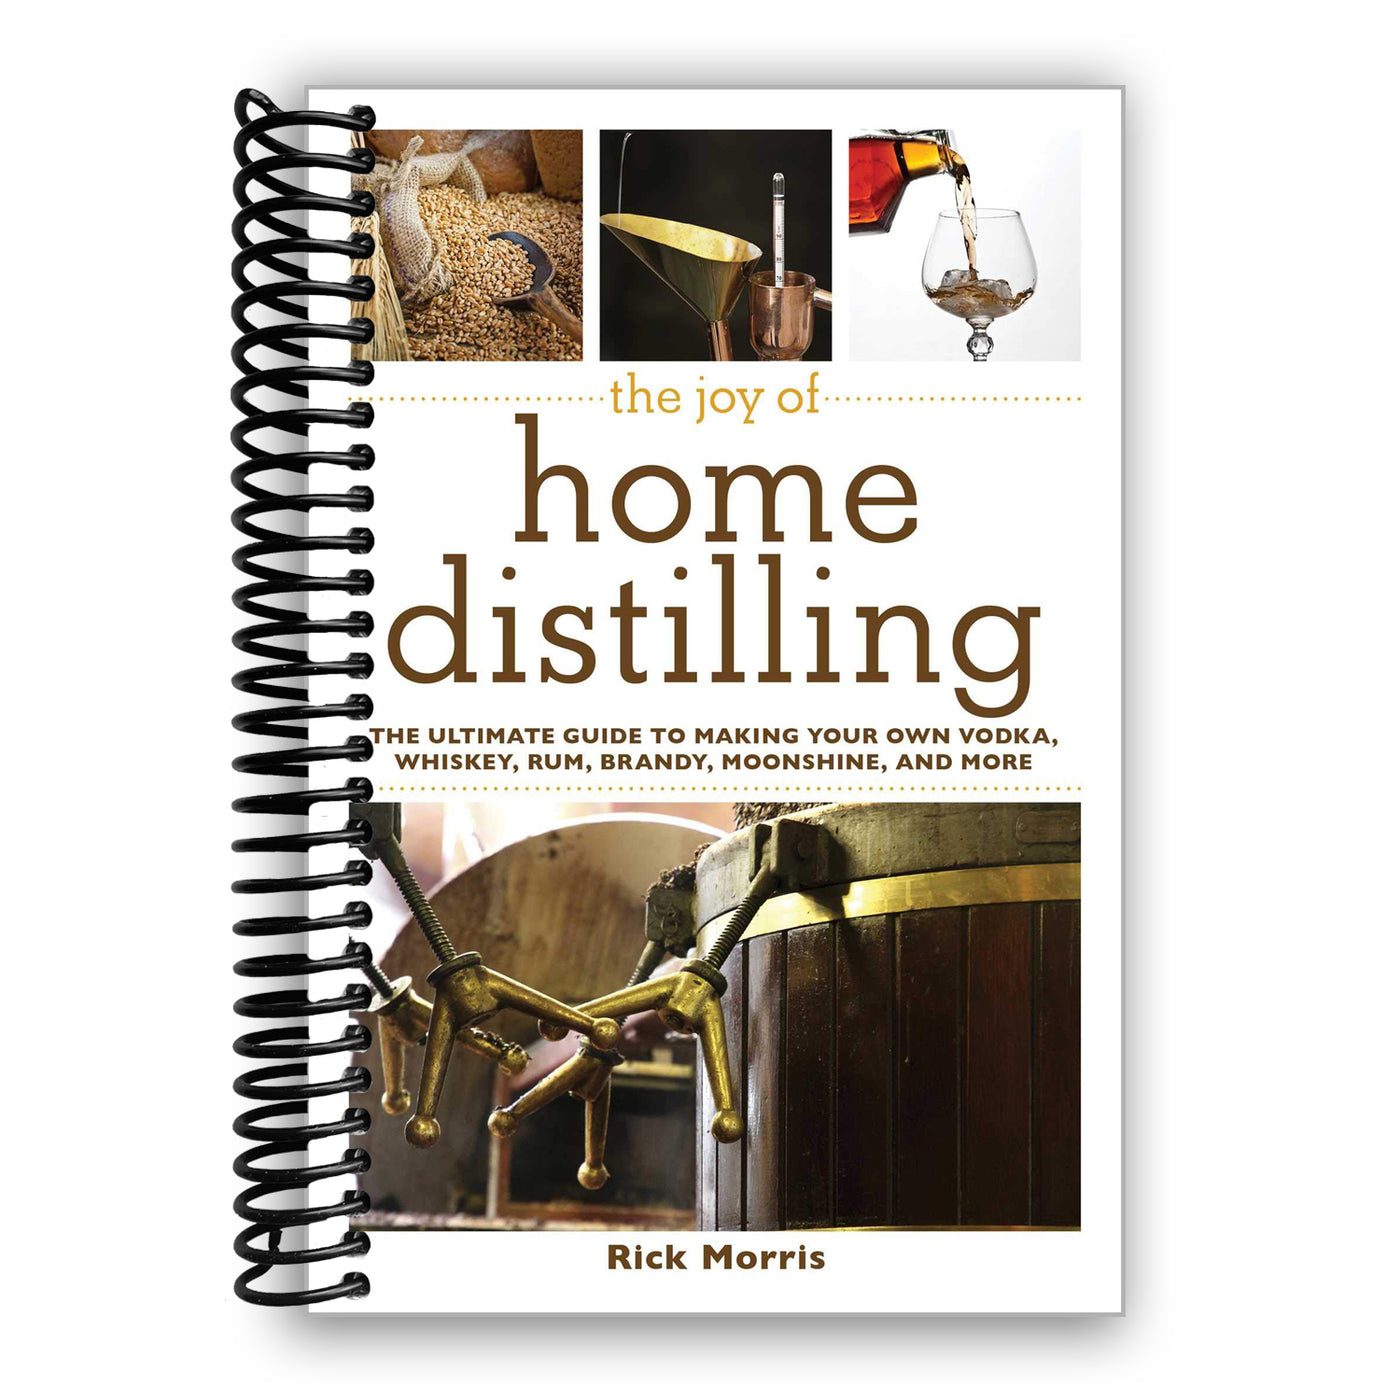 The Joy of Home Distilling: The Ultimate Guide to Making Your Own Vodka, Whiskey, Rum, Brandy, Moonshine, and More (Joy of Series) (Spiral Bound)